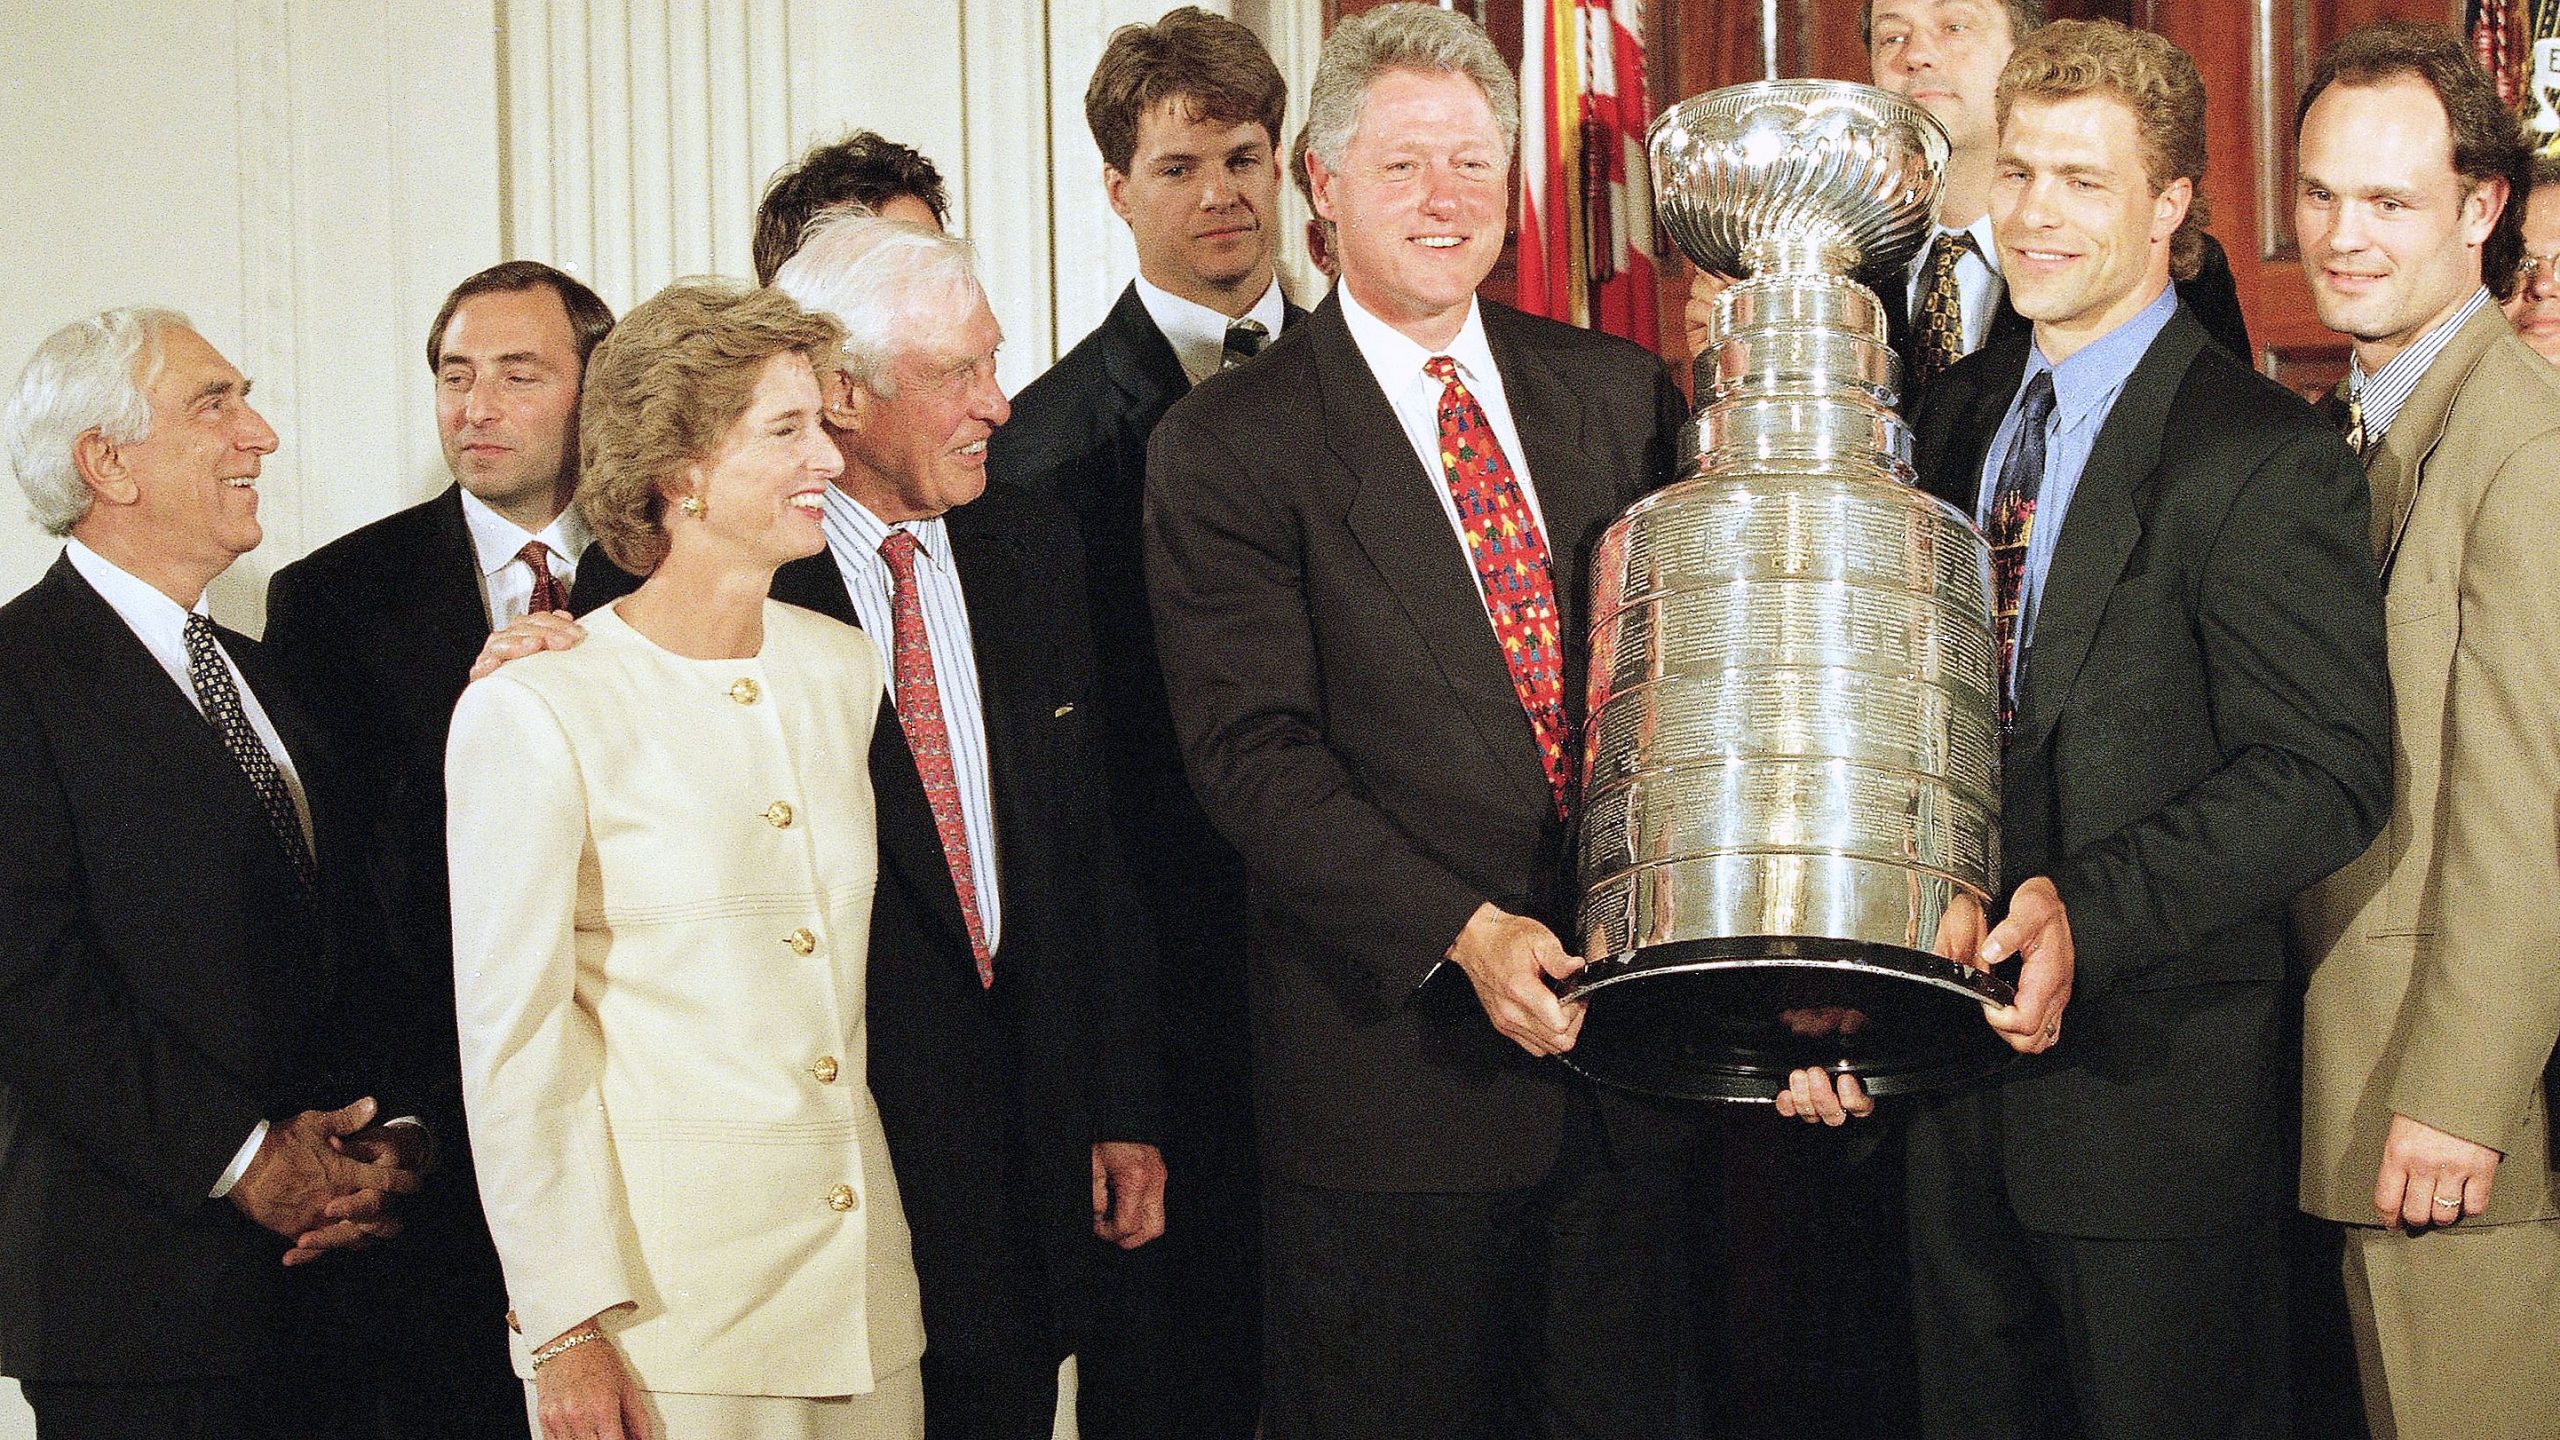 The Road to the 1994 Stanley Cup: Rangers vs. Devils